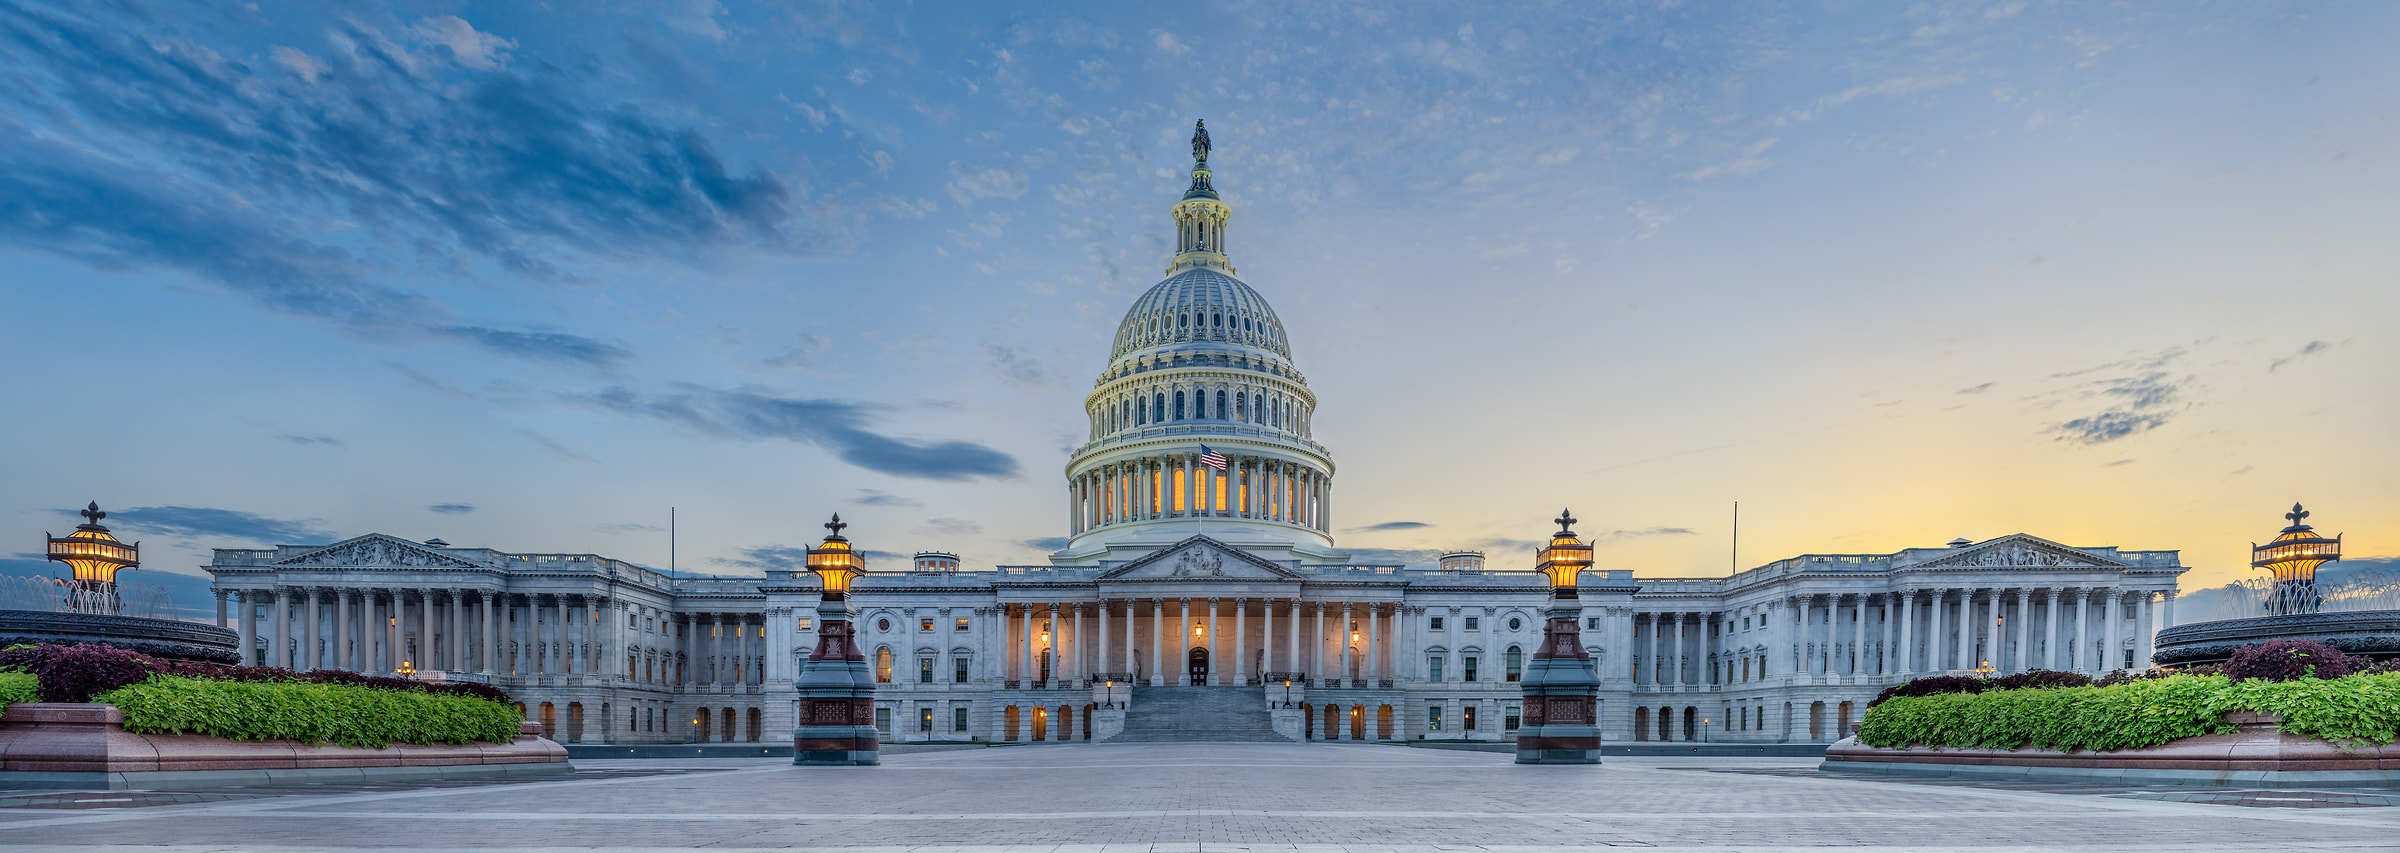 263 megapixels! A very high resolution, large-format VAST photo print of the U.S. Capitol Building at sunset and twilight; photograph created by Tim Lo Monaco in the United States Capitol, Washington, D.C., USA.